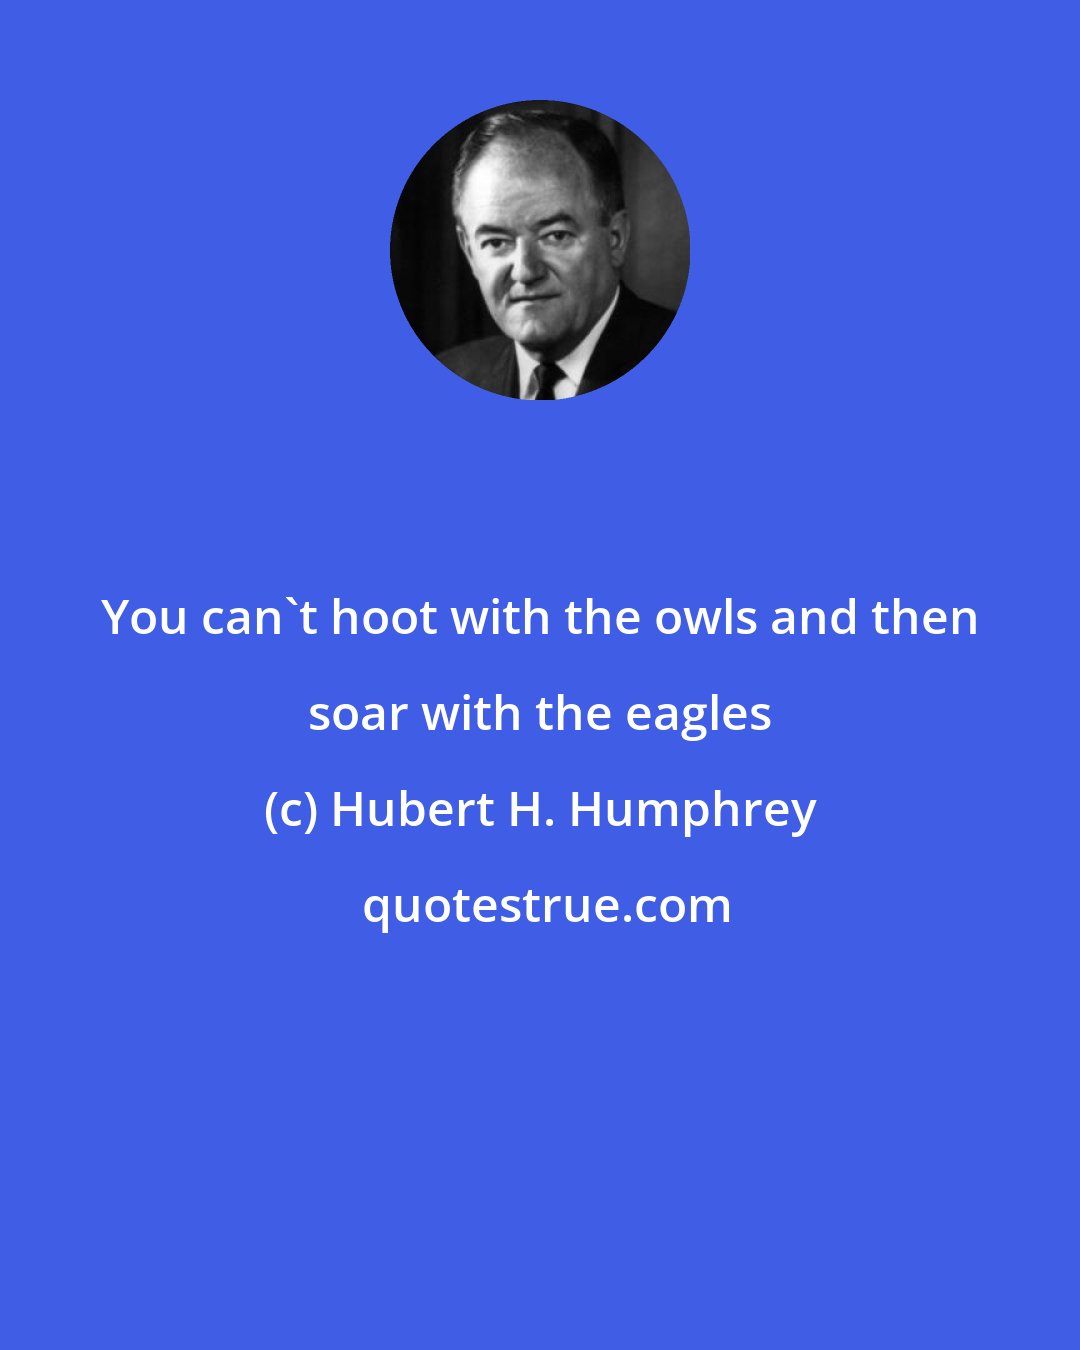 Hubert H. Humphrey: You can't hoot with the owls and then soar with the eagles